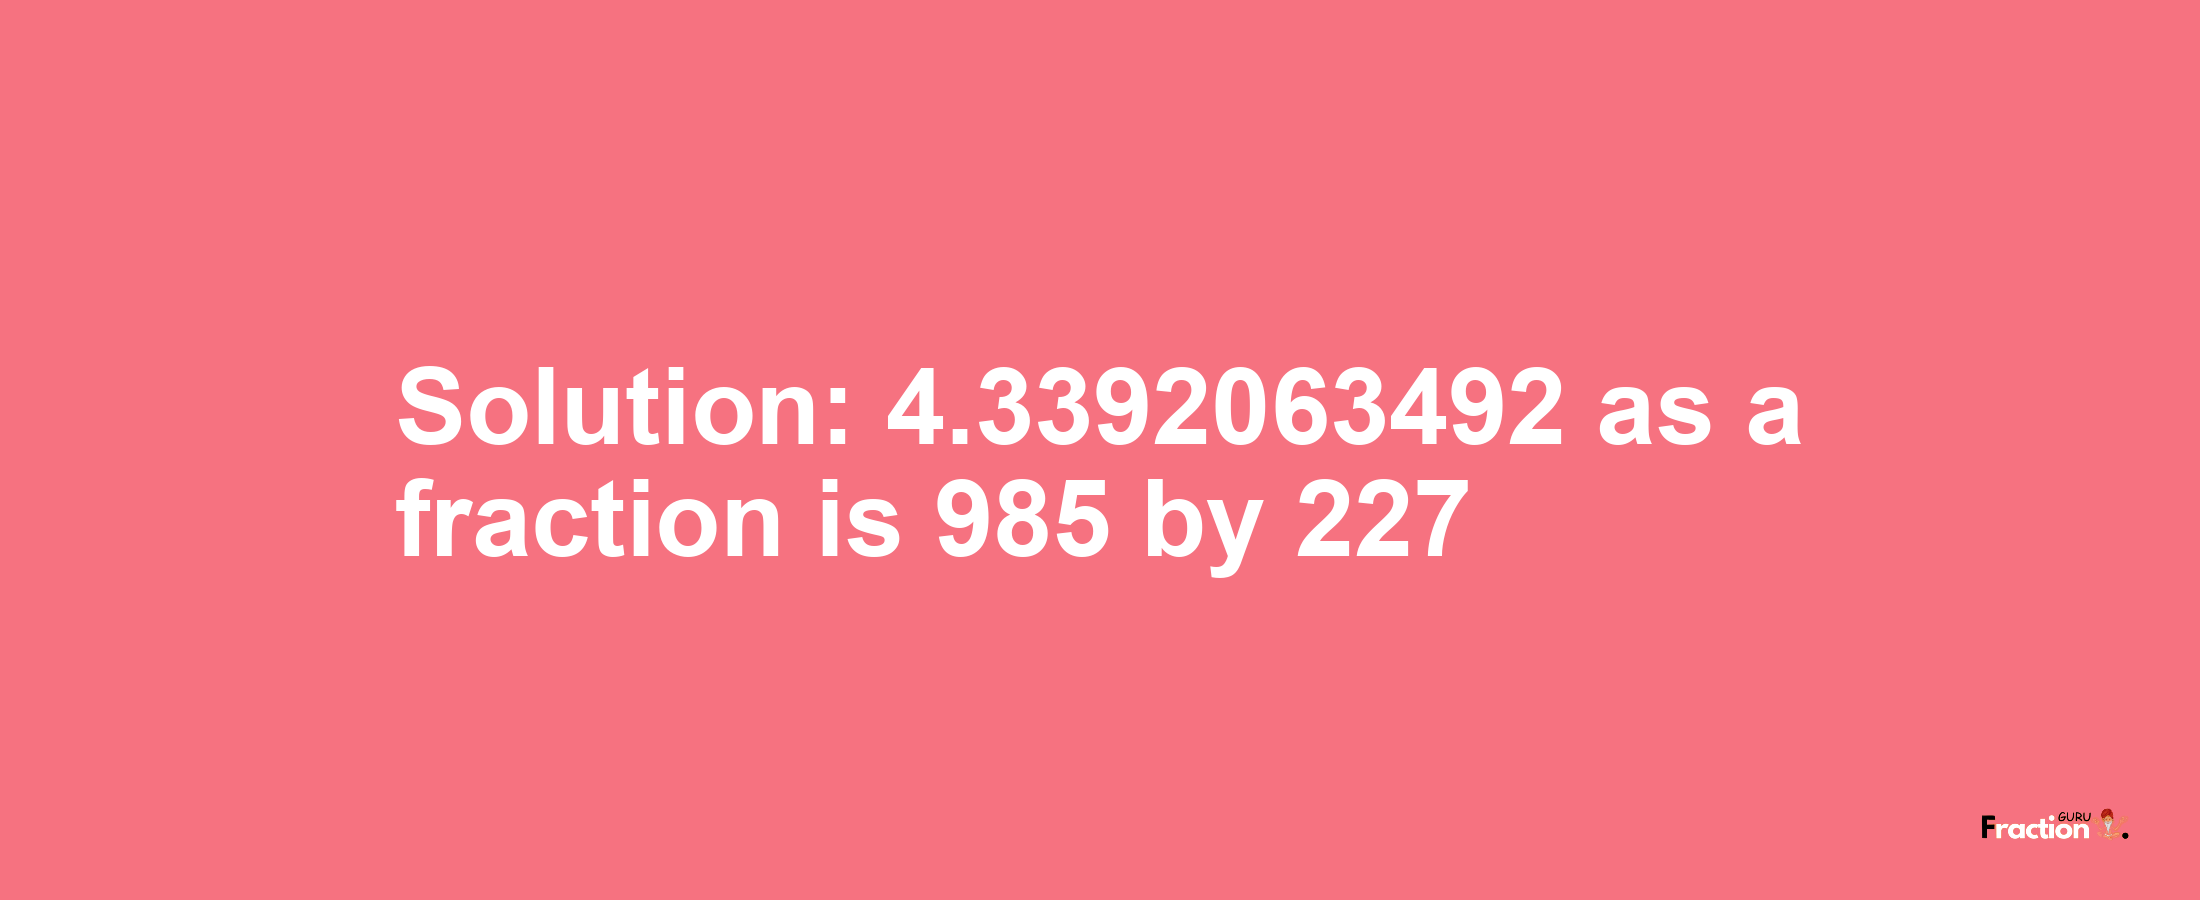 Solution:4.3392063492 as a fraction is 985/227